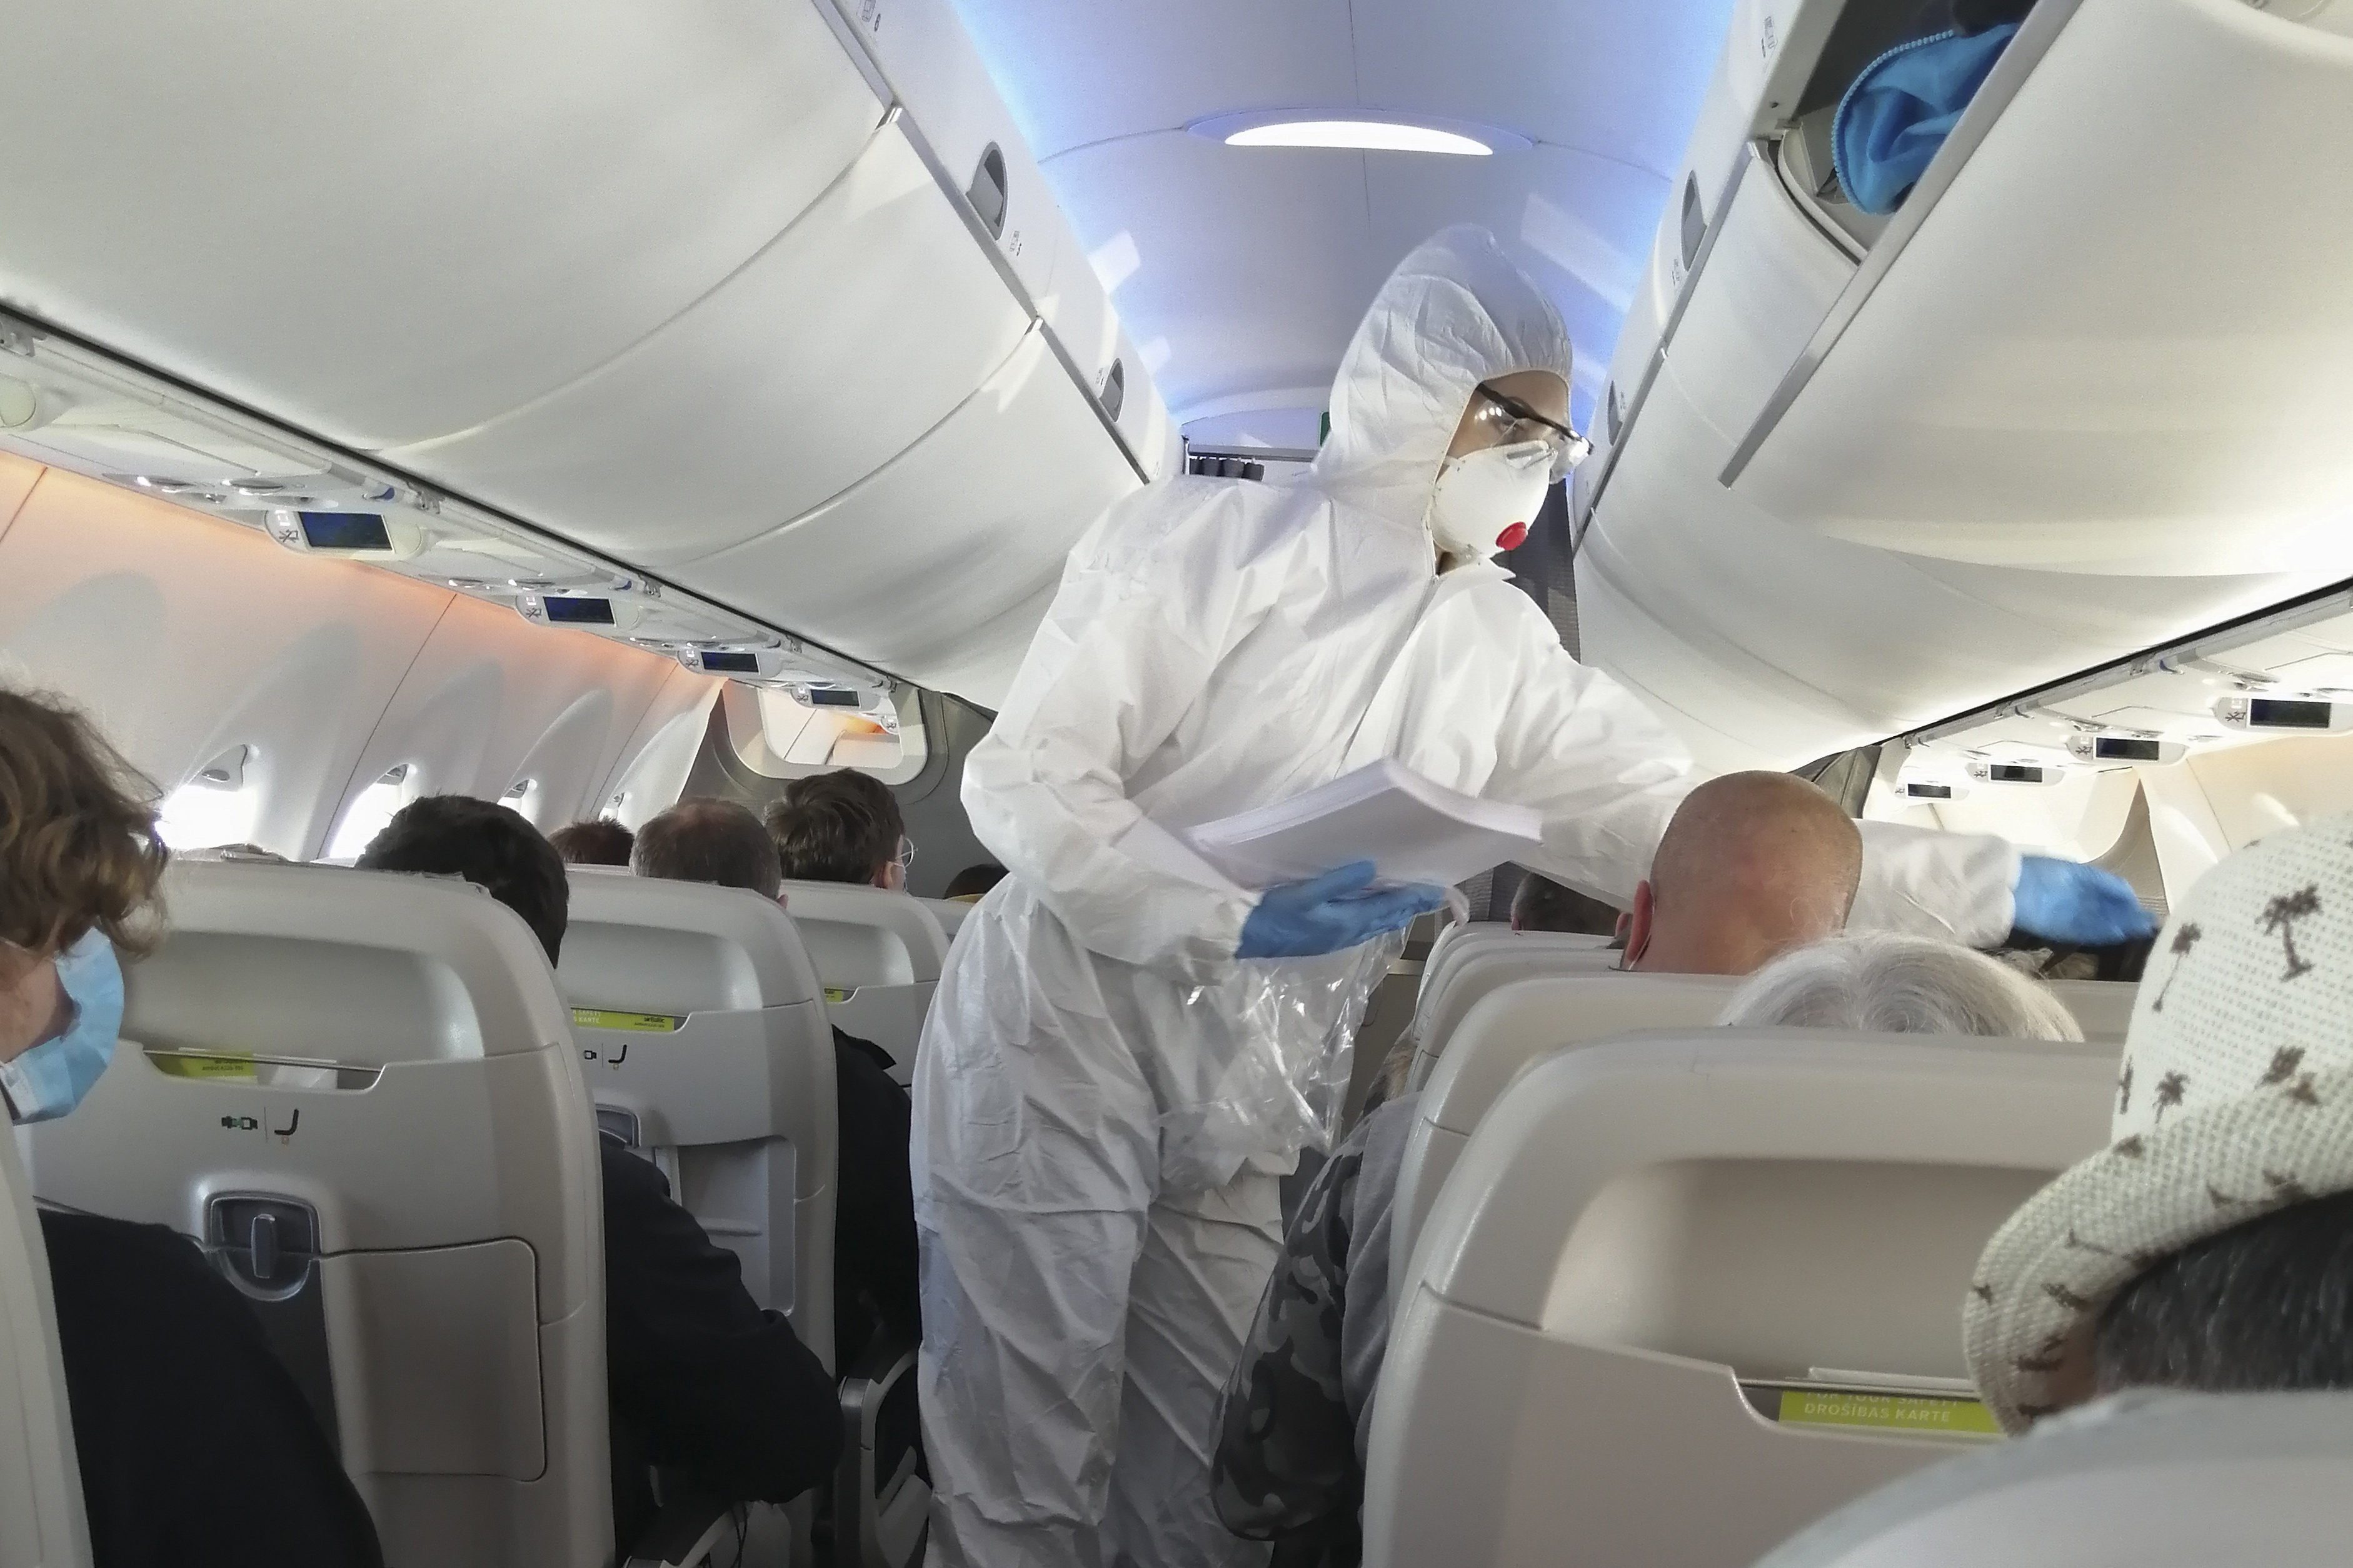 Stewardess in a white overalls and mask in the cabin serves passengers.